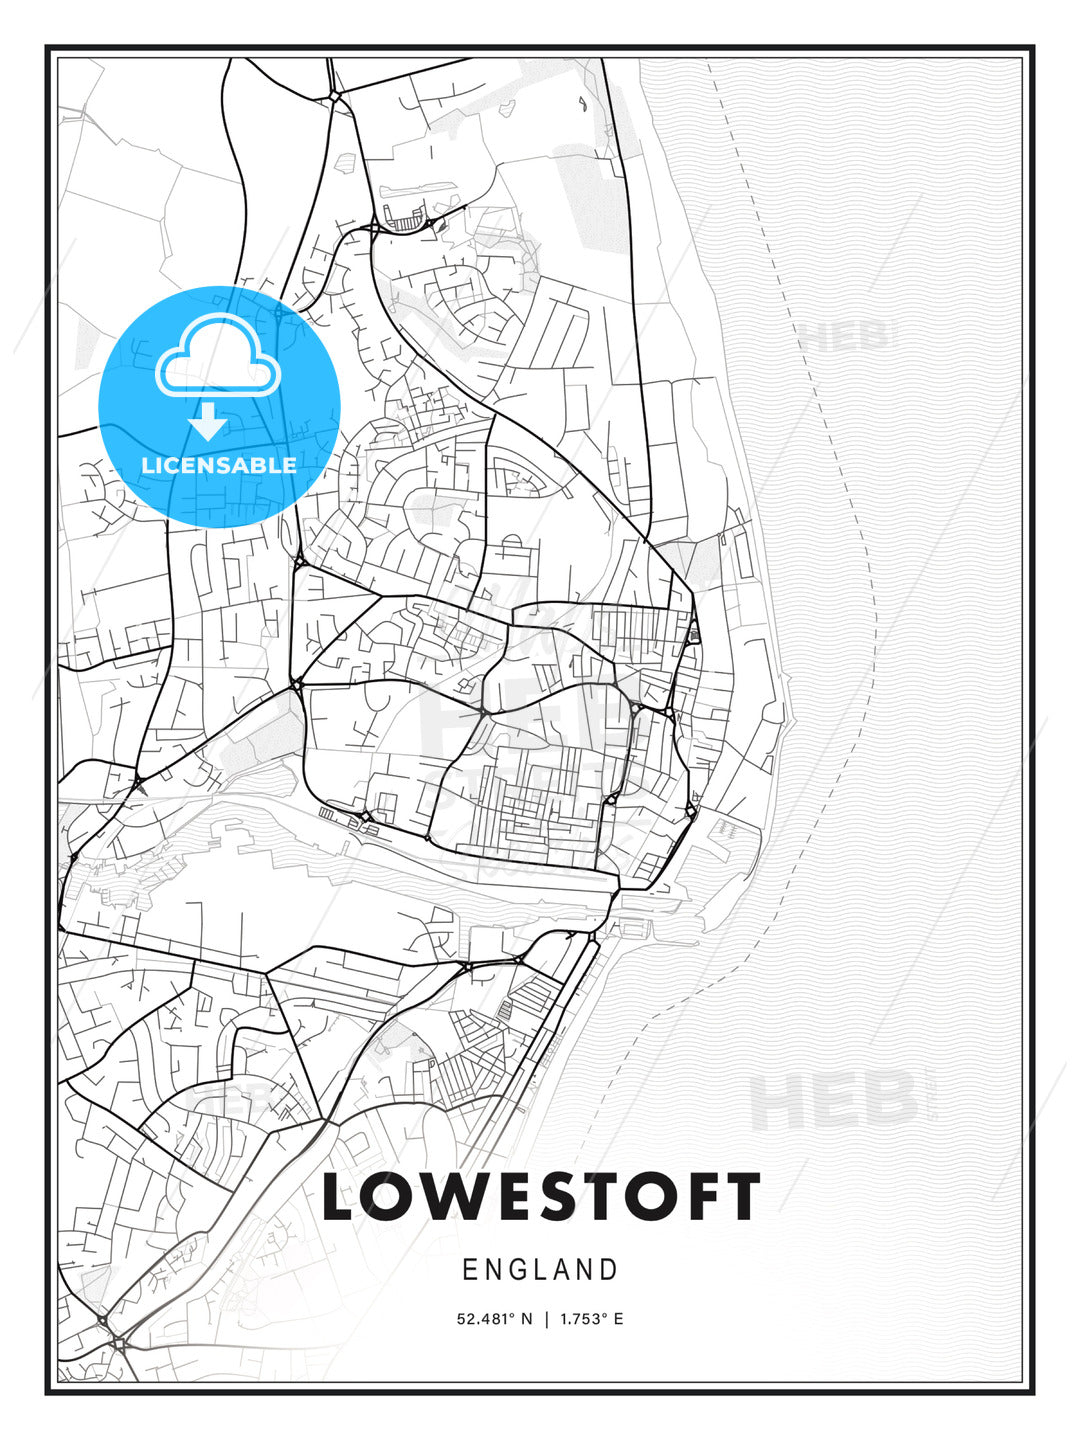 Lowestoft, England, Modern Print Template in Various Formats - HEBSTREITS Sketches